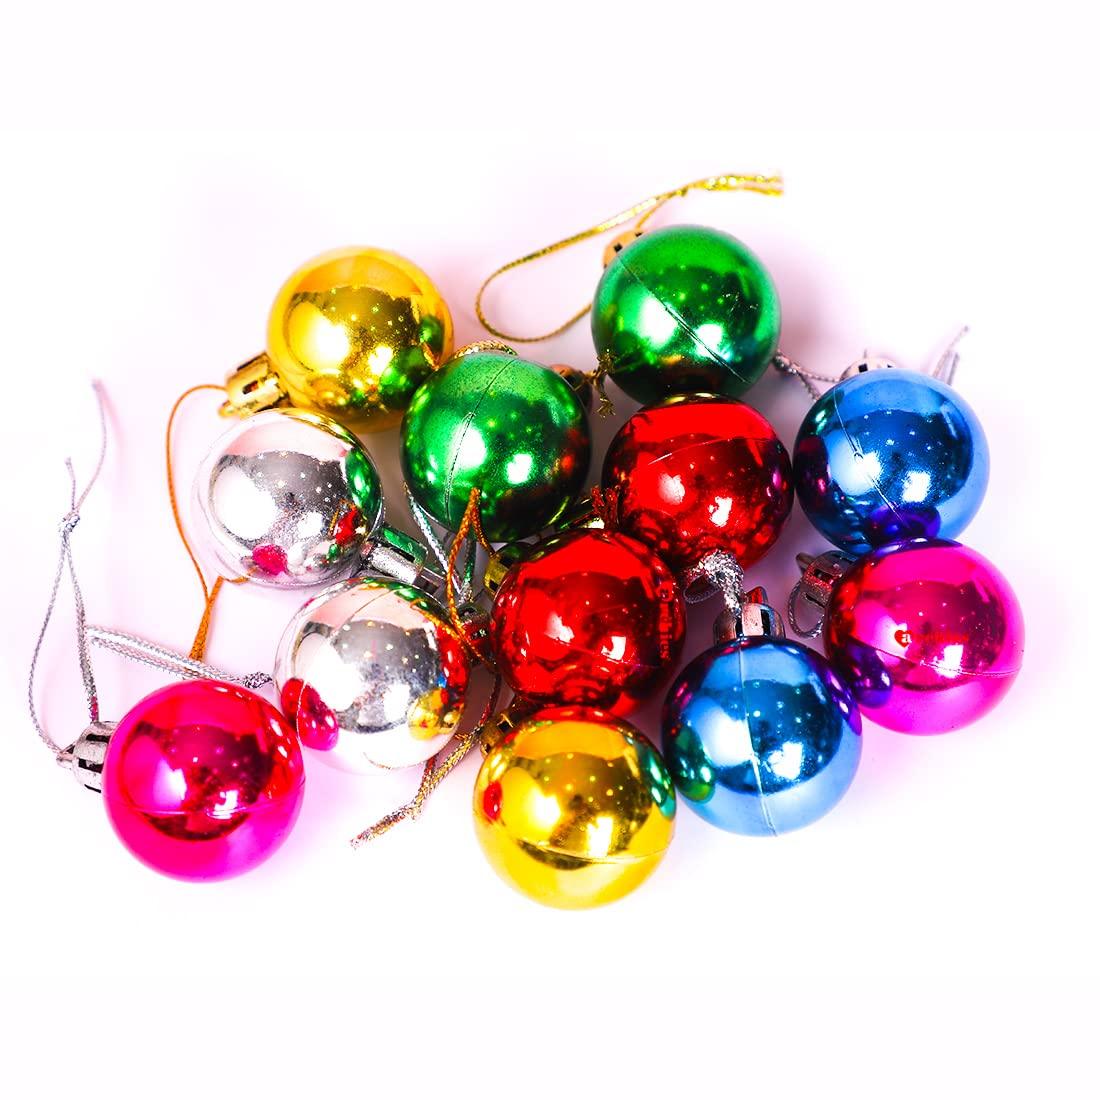 PartyCorp Multicolour Ball Shaped Dangler Decoration Set For Christmas Tree, DIY Pack Of 12